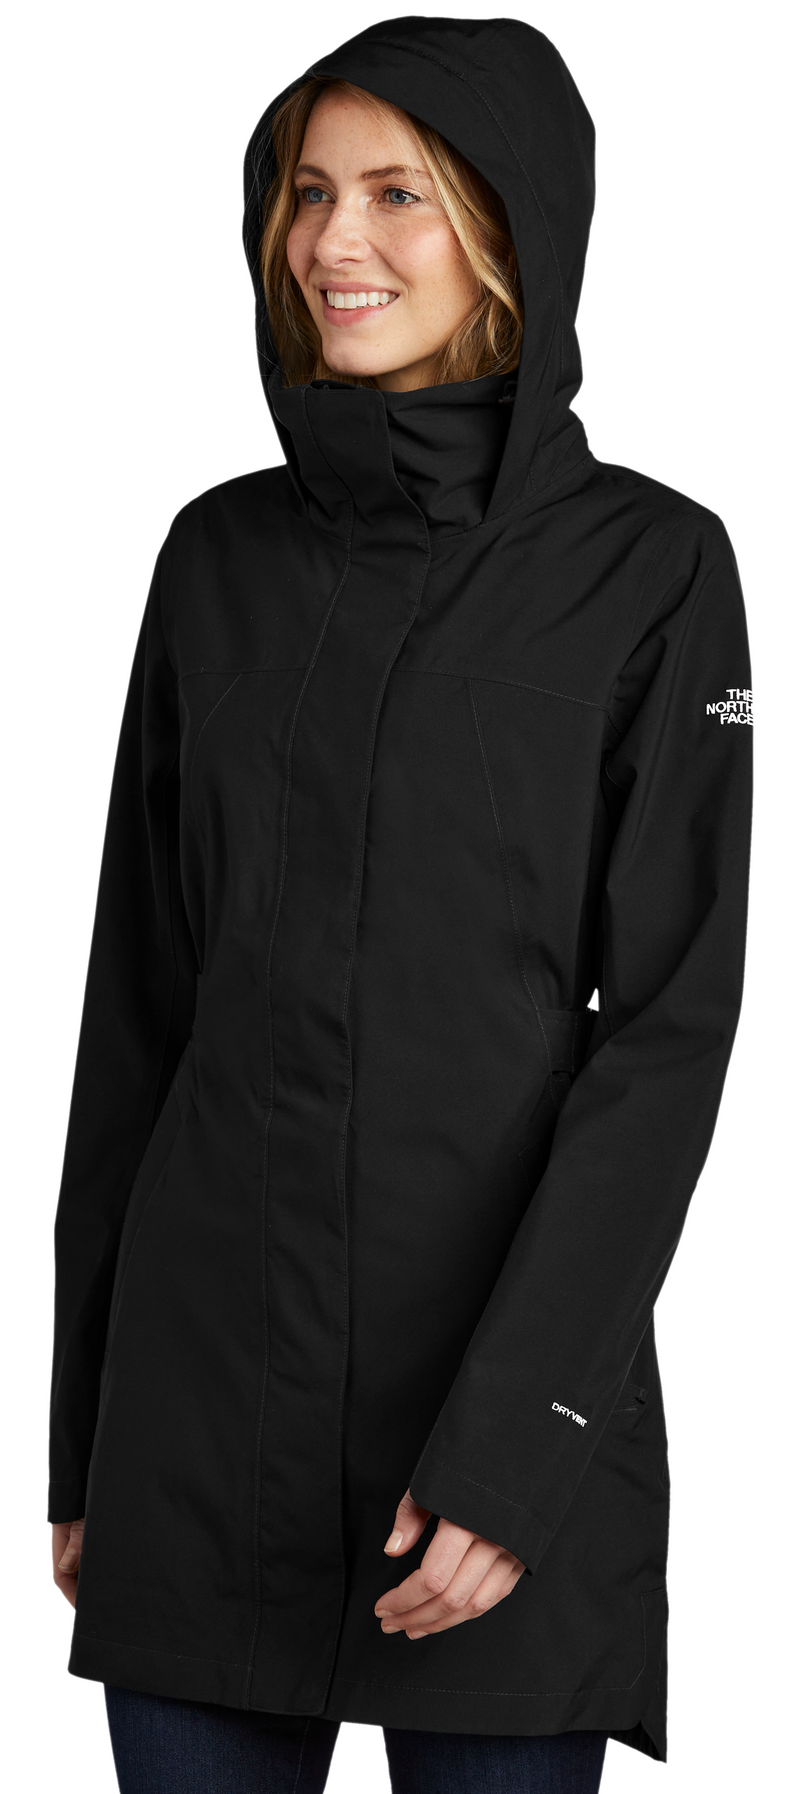 The North Face [NF0A529O] Ladies City Trench.